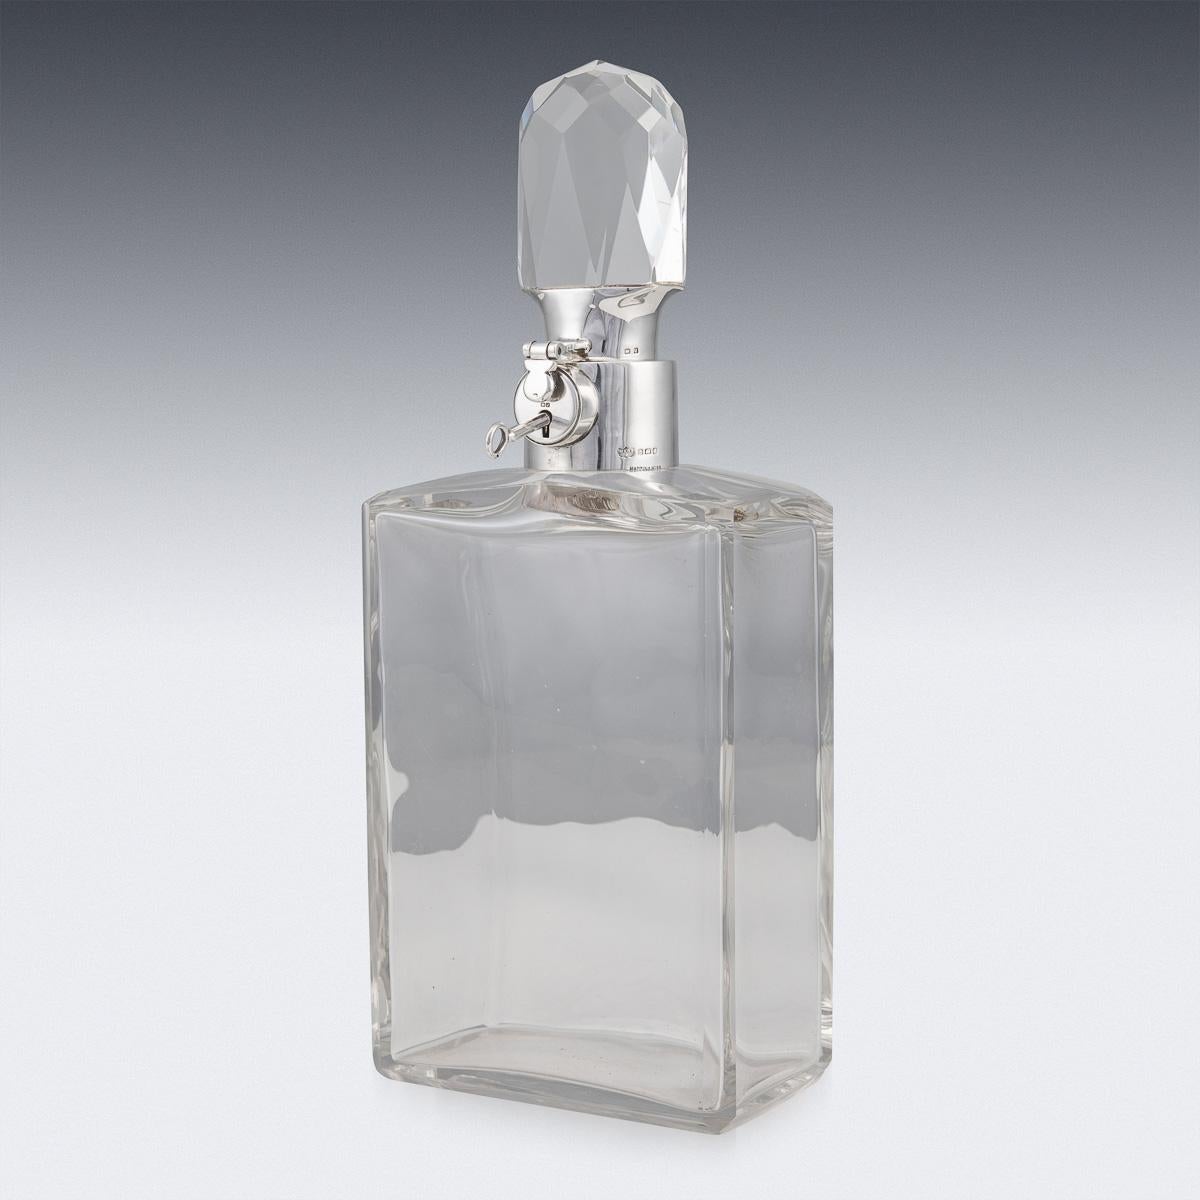 Art Deco 20th Century English Solid Silver & Glass Spirit Decanter with Lock & Key c.1933 For Sale